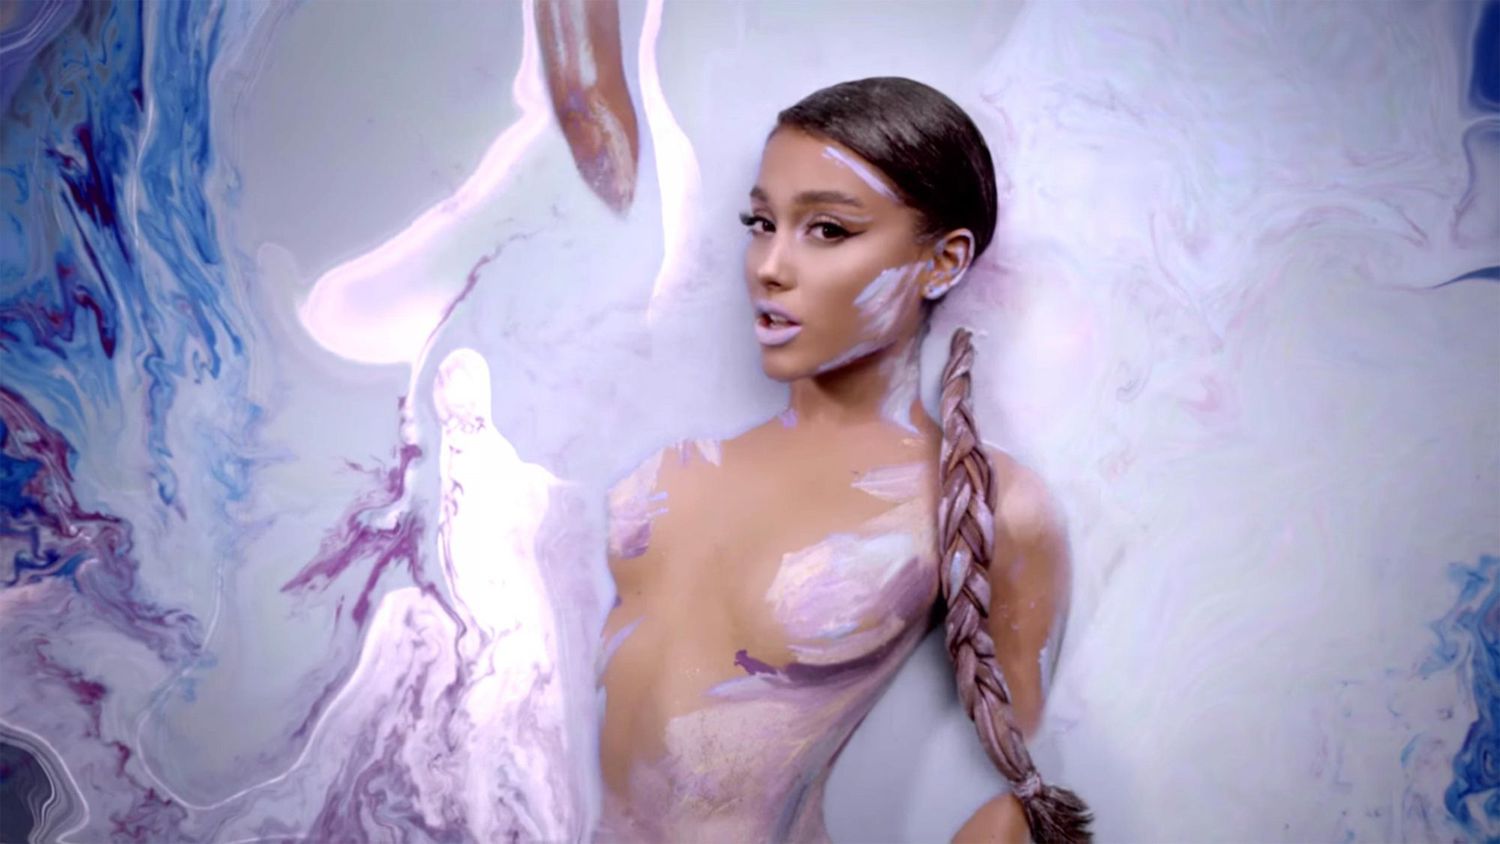 deondre joseph recommends ariana grande leaked naked pics pic